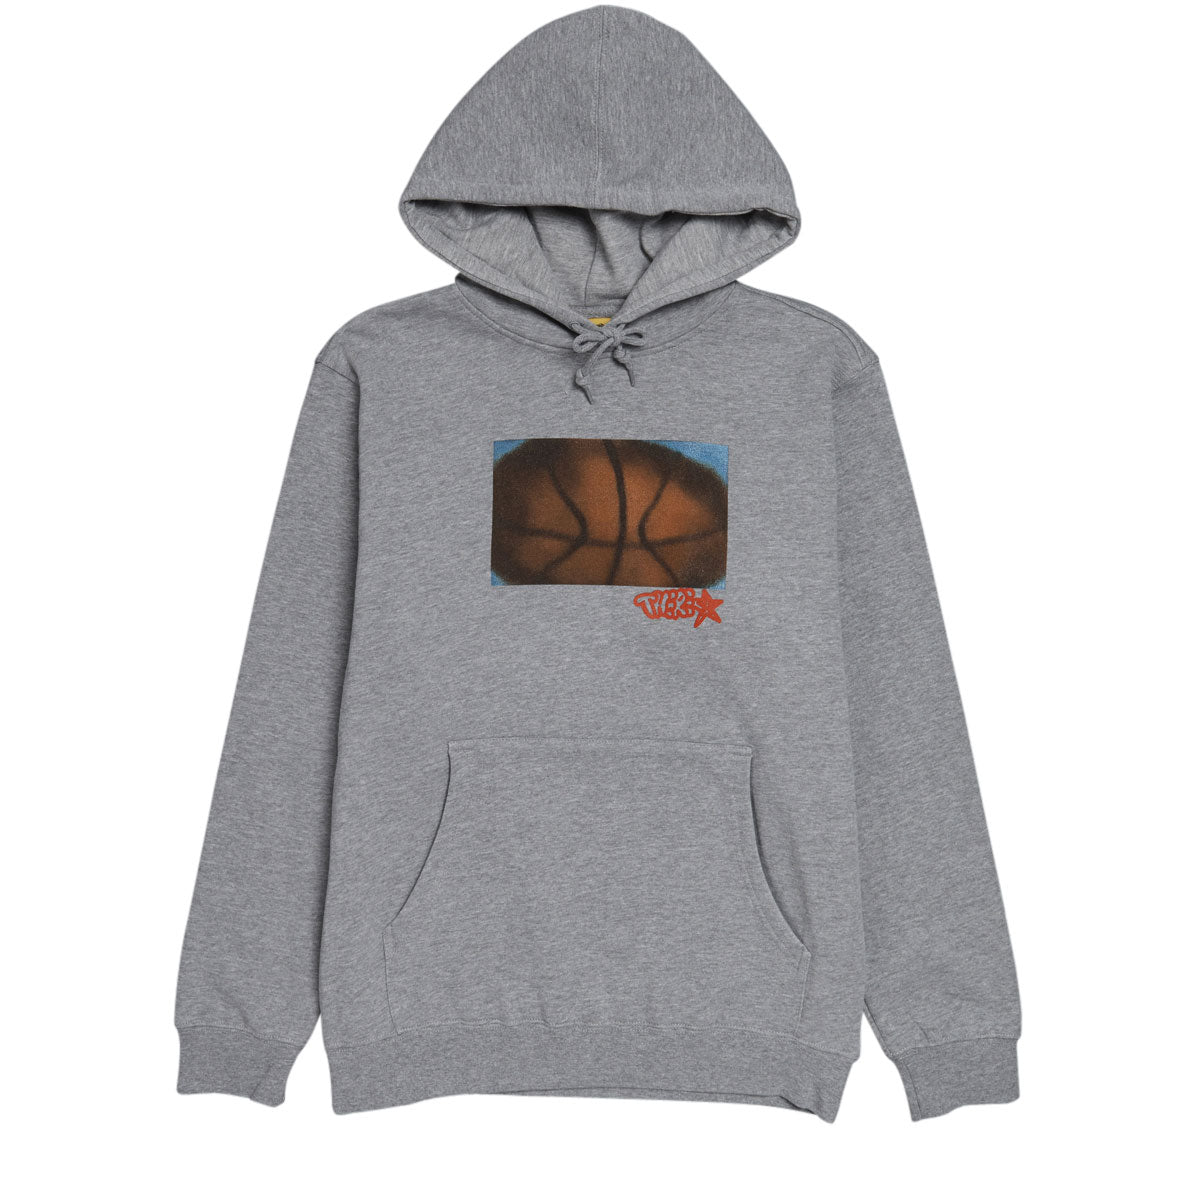 There Ball Hoodie - Heather Grey image 1